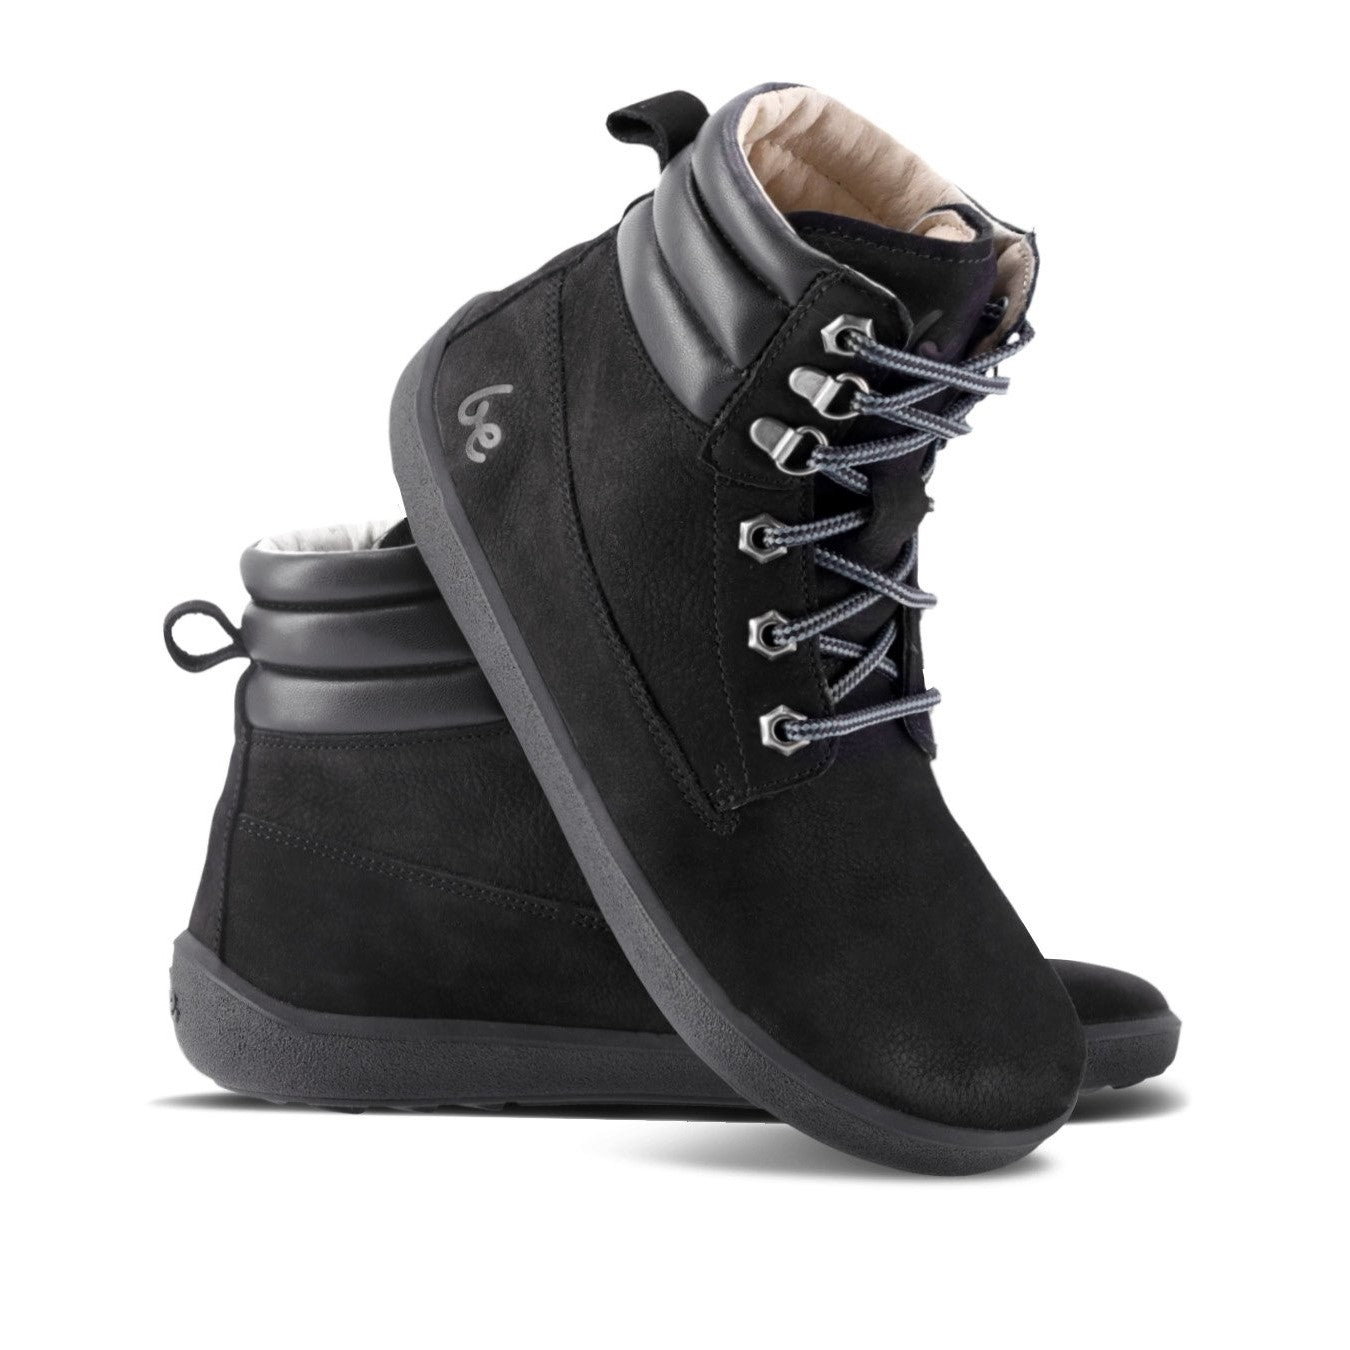 A photo of Be Lenka Nevada Boots made from nubuck leather and rubber soles. The boots are black in color, they are combat boot style with laces, a padded collar and a chunky eyelets. Both boots are shown beside each other from the right side, the right boot’s heel is leaning on against the left boot against a white background. #color_black